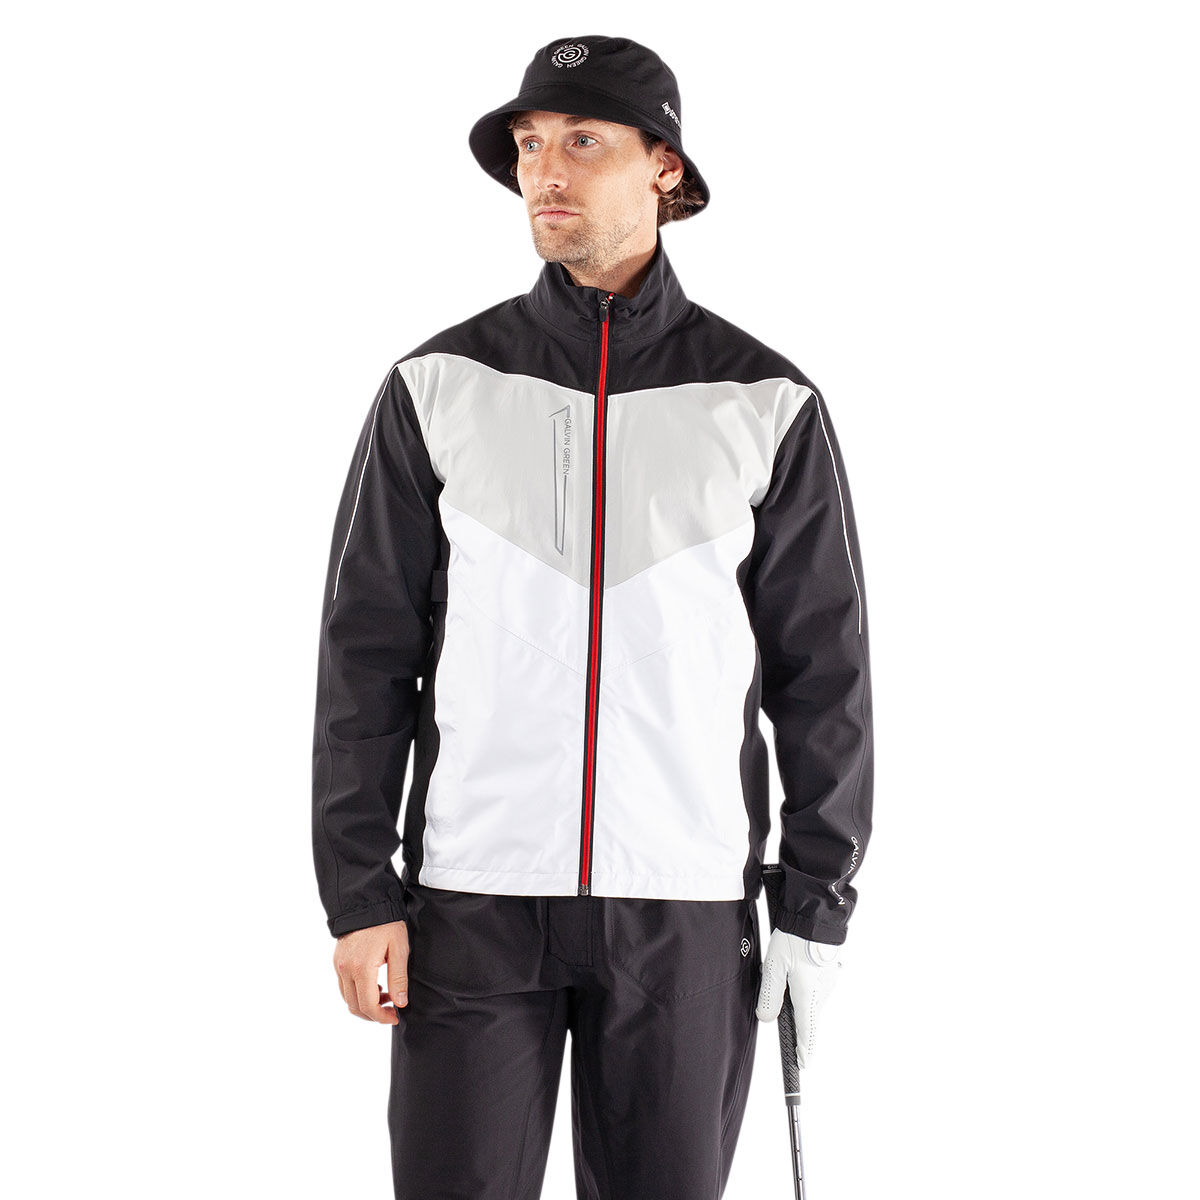 Galvin Green Men's Armstrong Waterproof Golf Jacket, Mens, Black/white/red, Large | American Golf von Galvin Green